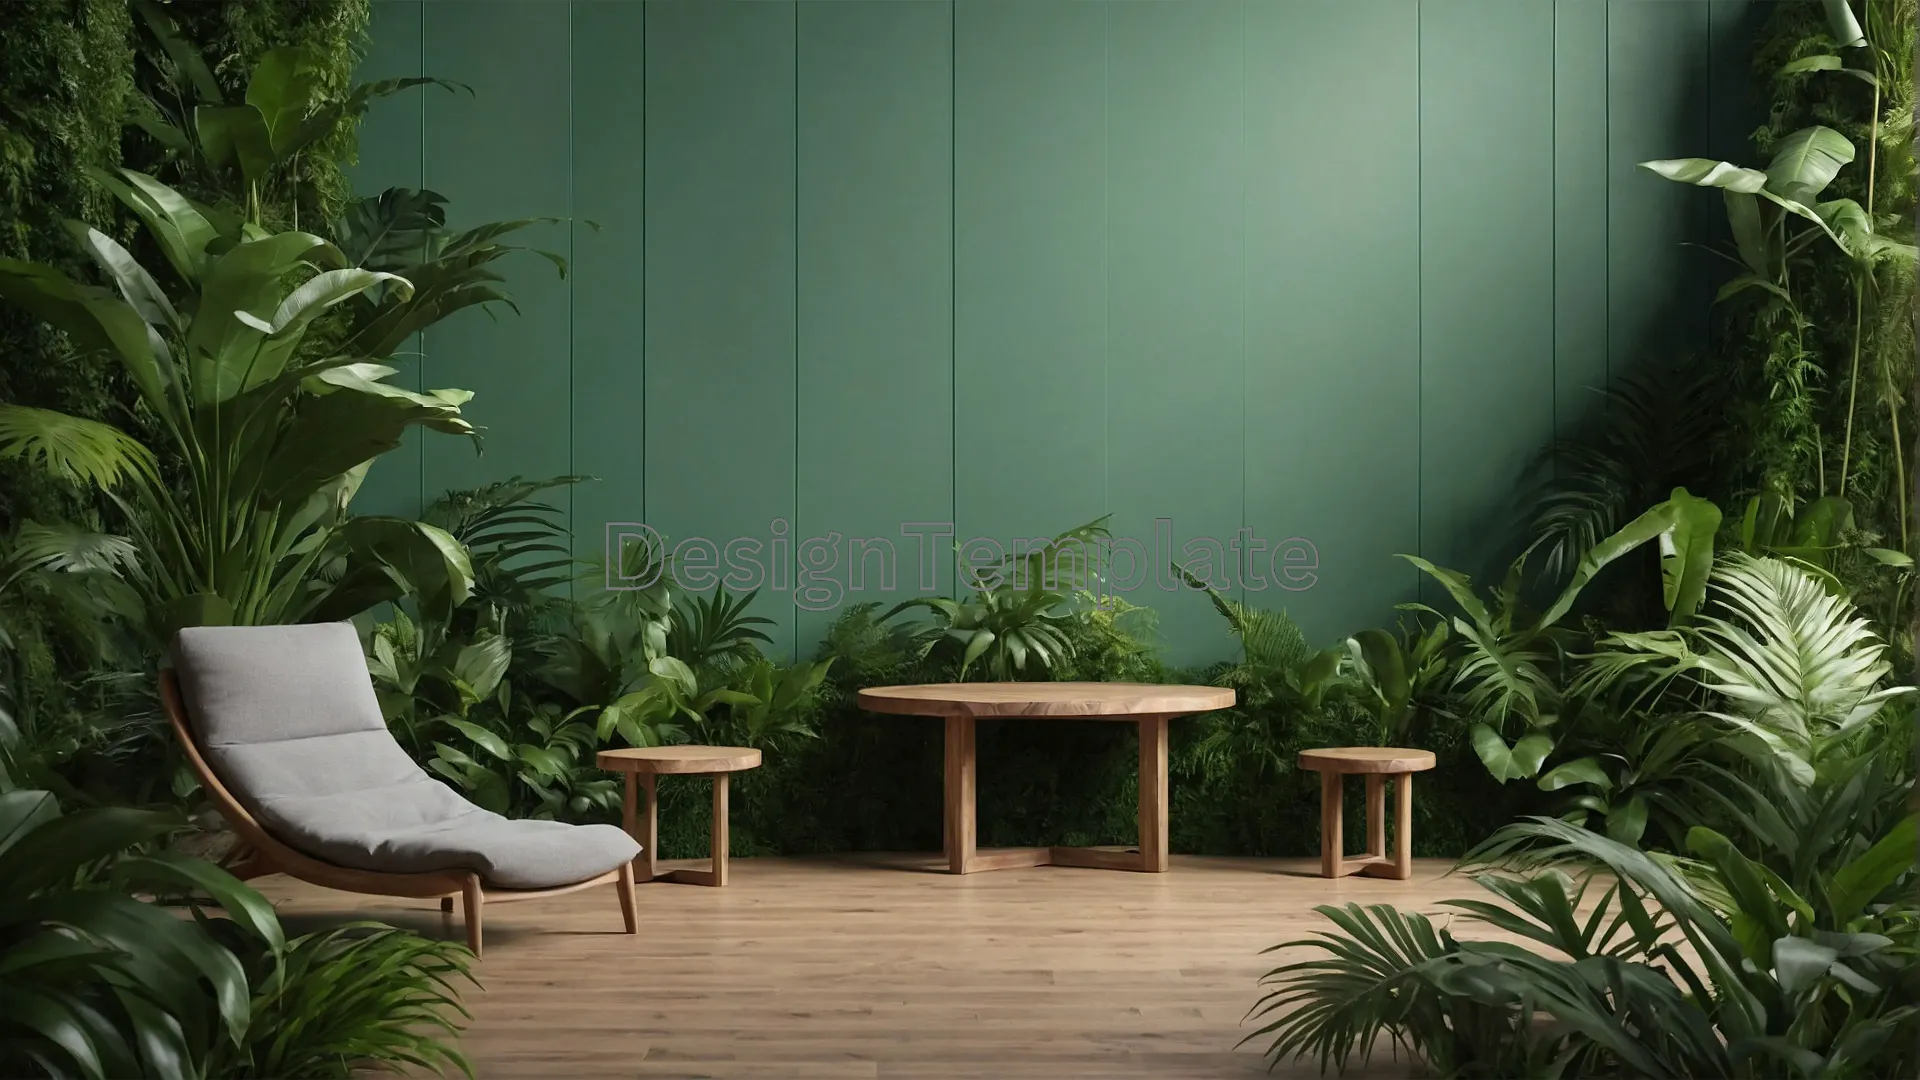 Contemporary Green Living Space Plant-Filled Room Image image